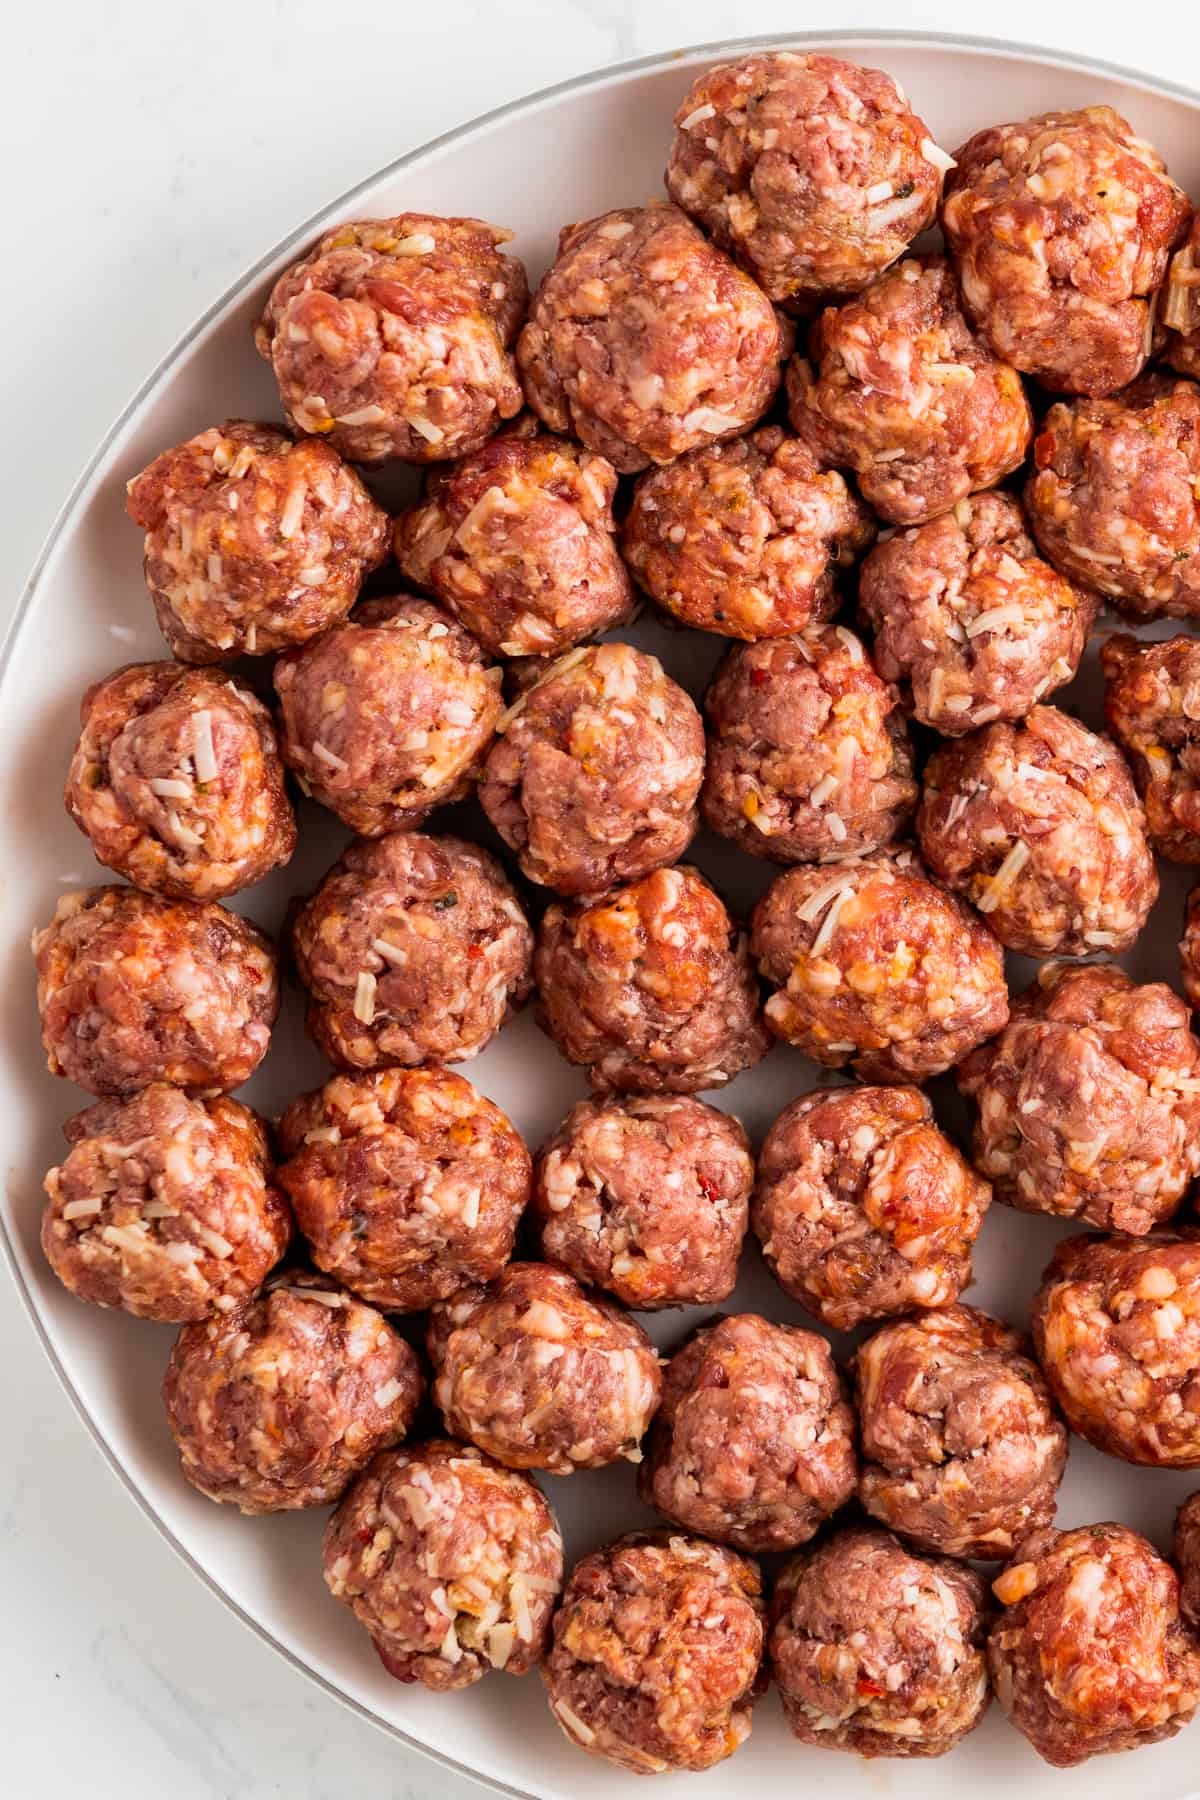 Rolled meatballs in a large plate.